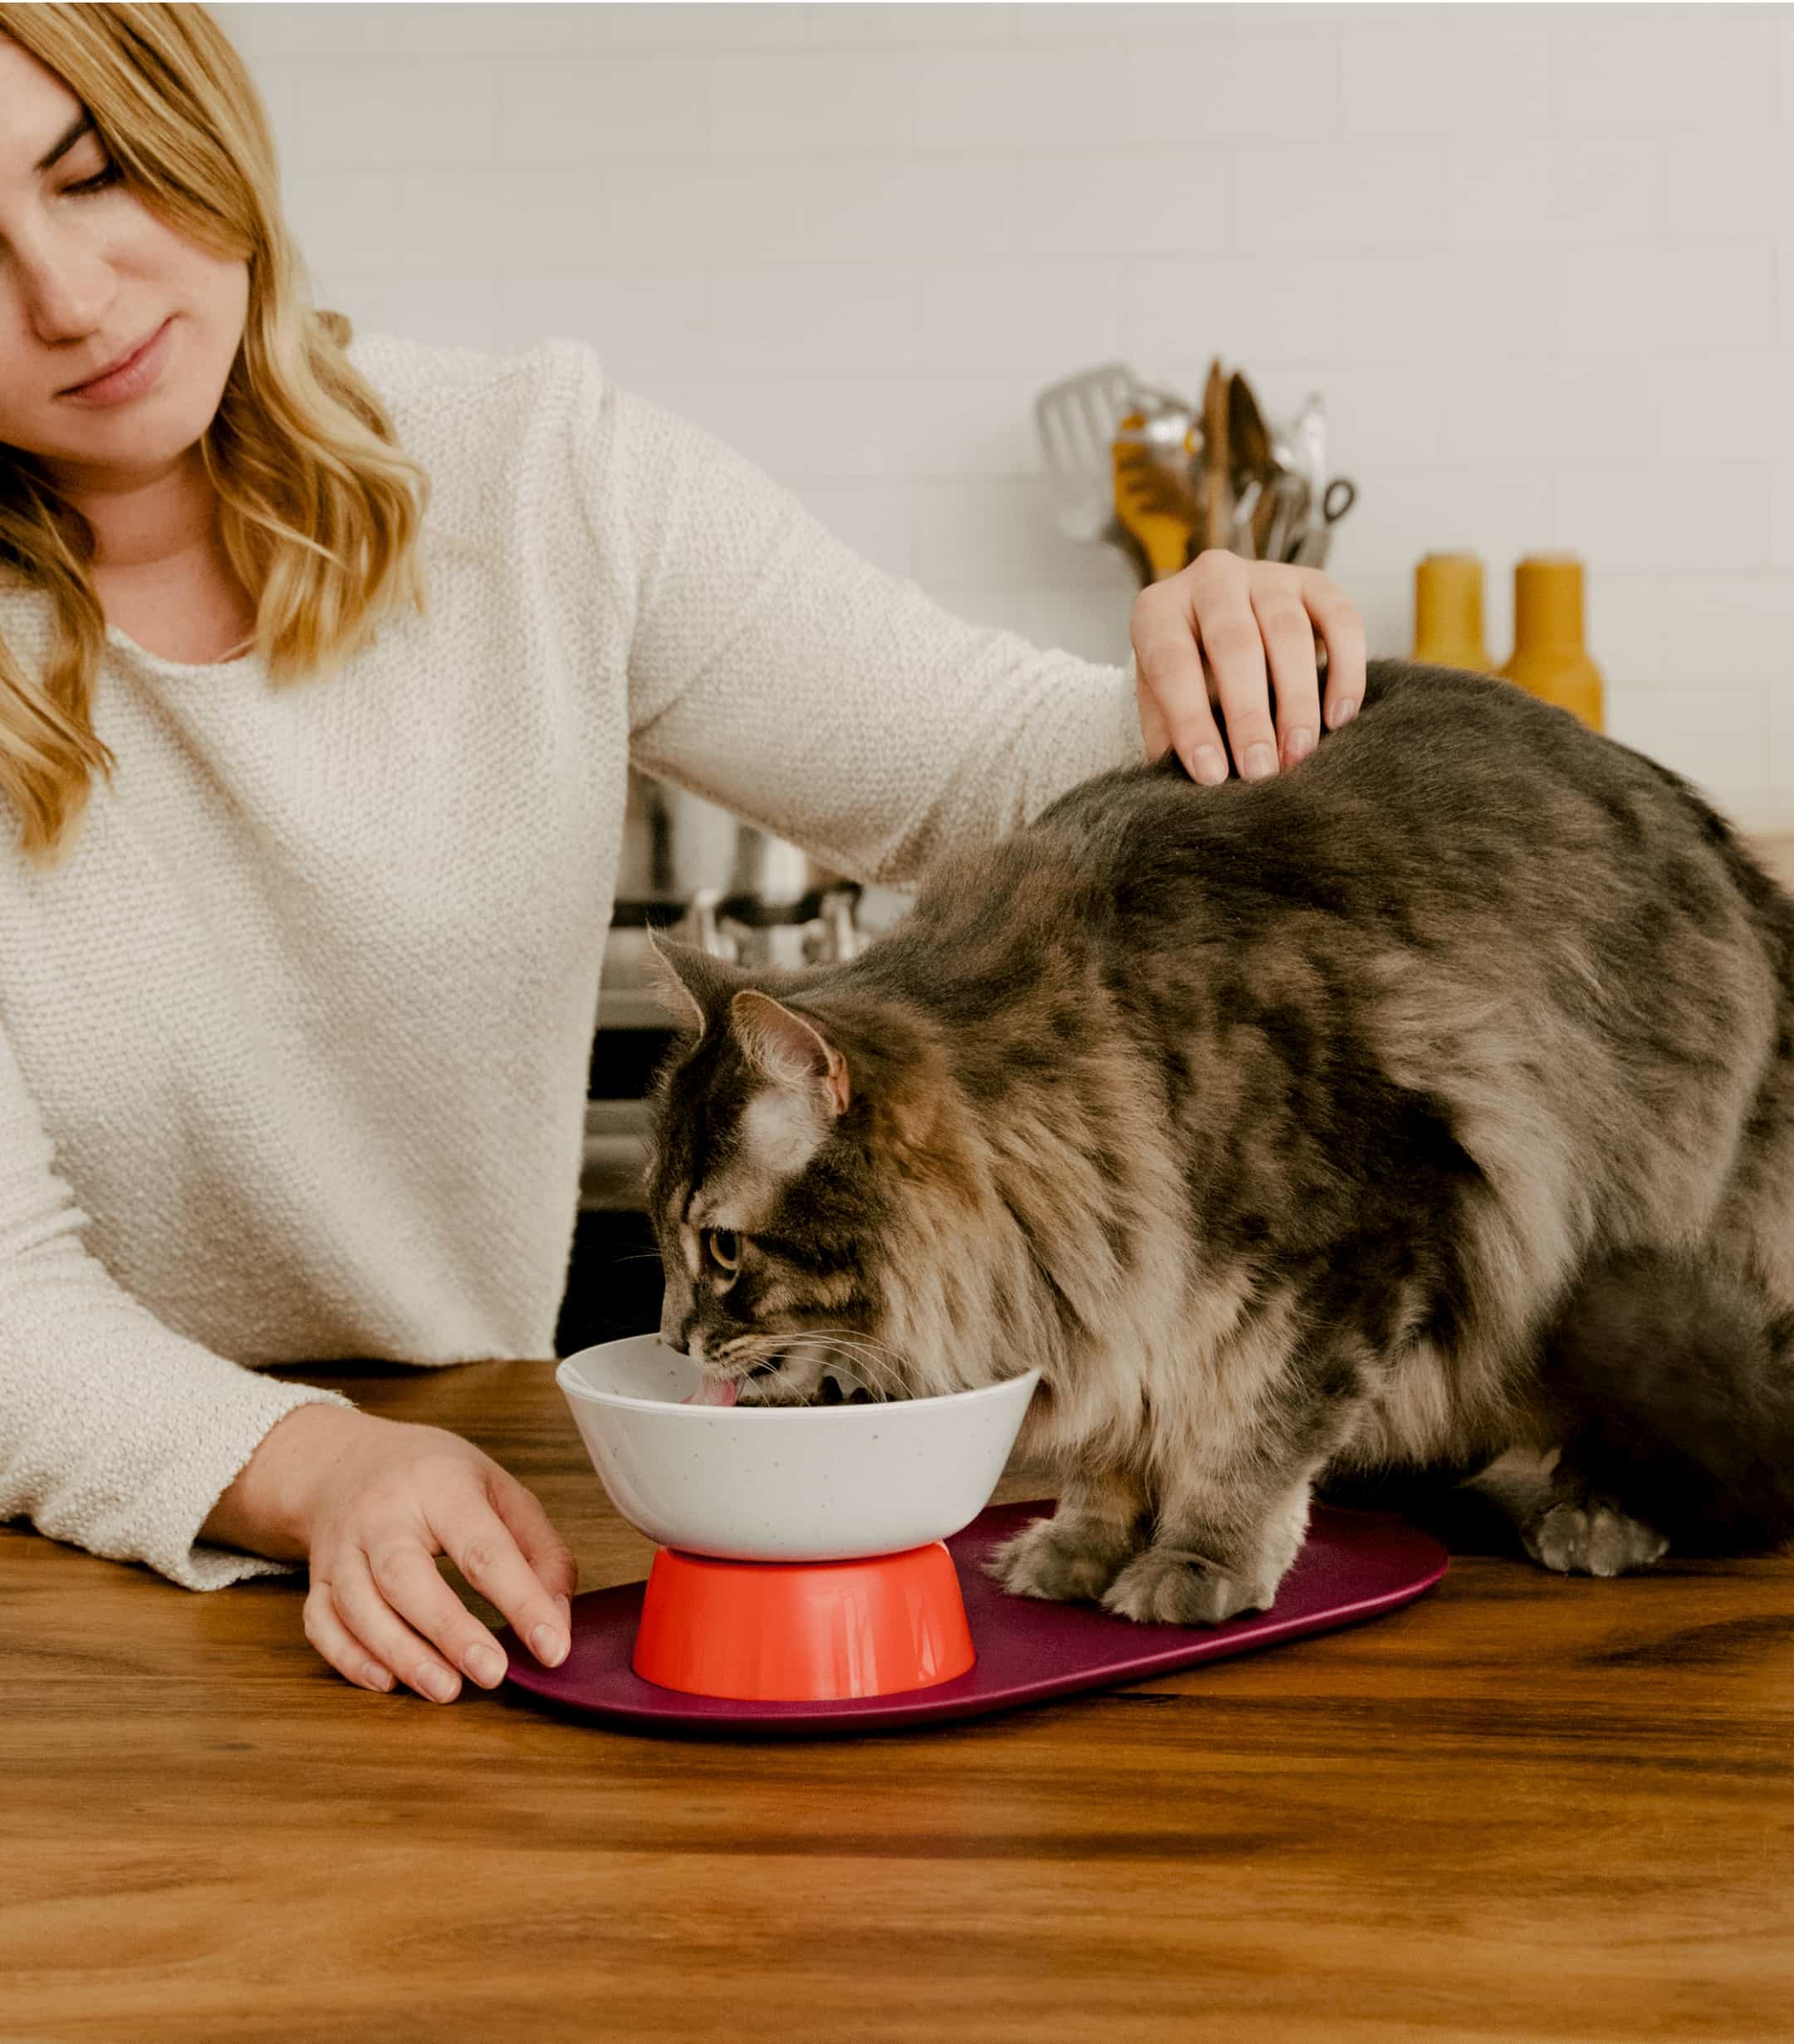 Woman petting cat eating food from Cat Person Mesa Bowl on kitchen counter